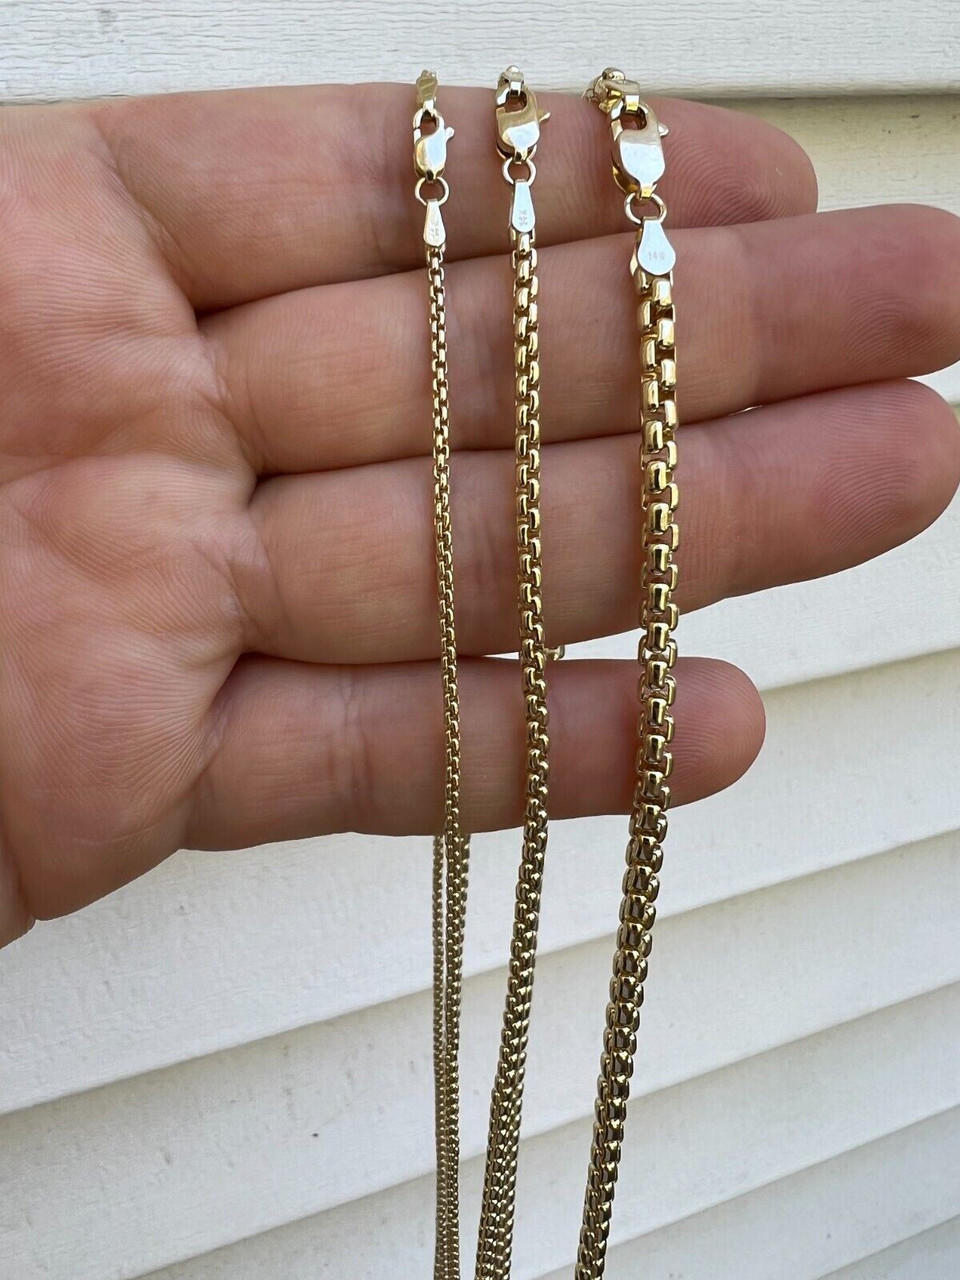 https://cdn11.bigcommerce.com/s-s8inshvd4z/images/stencil/original/products/5725/75261/harlembling-14k-real-solid-yellow-gold-rounded-box-rolo-chain-1.5mm-3.5mm-16-24-necklace-dollar45-50gram__67145.1665929042.jpg?c=2